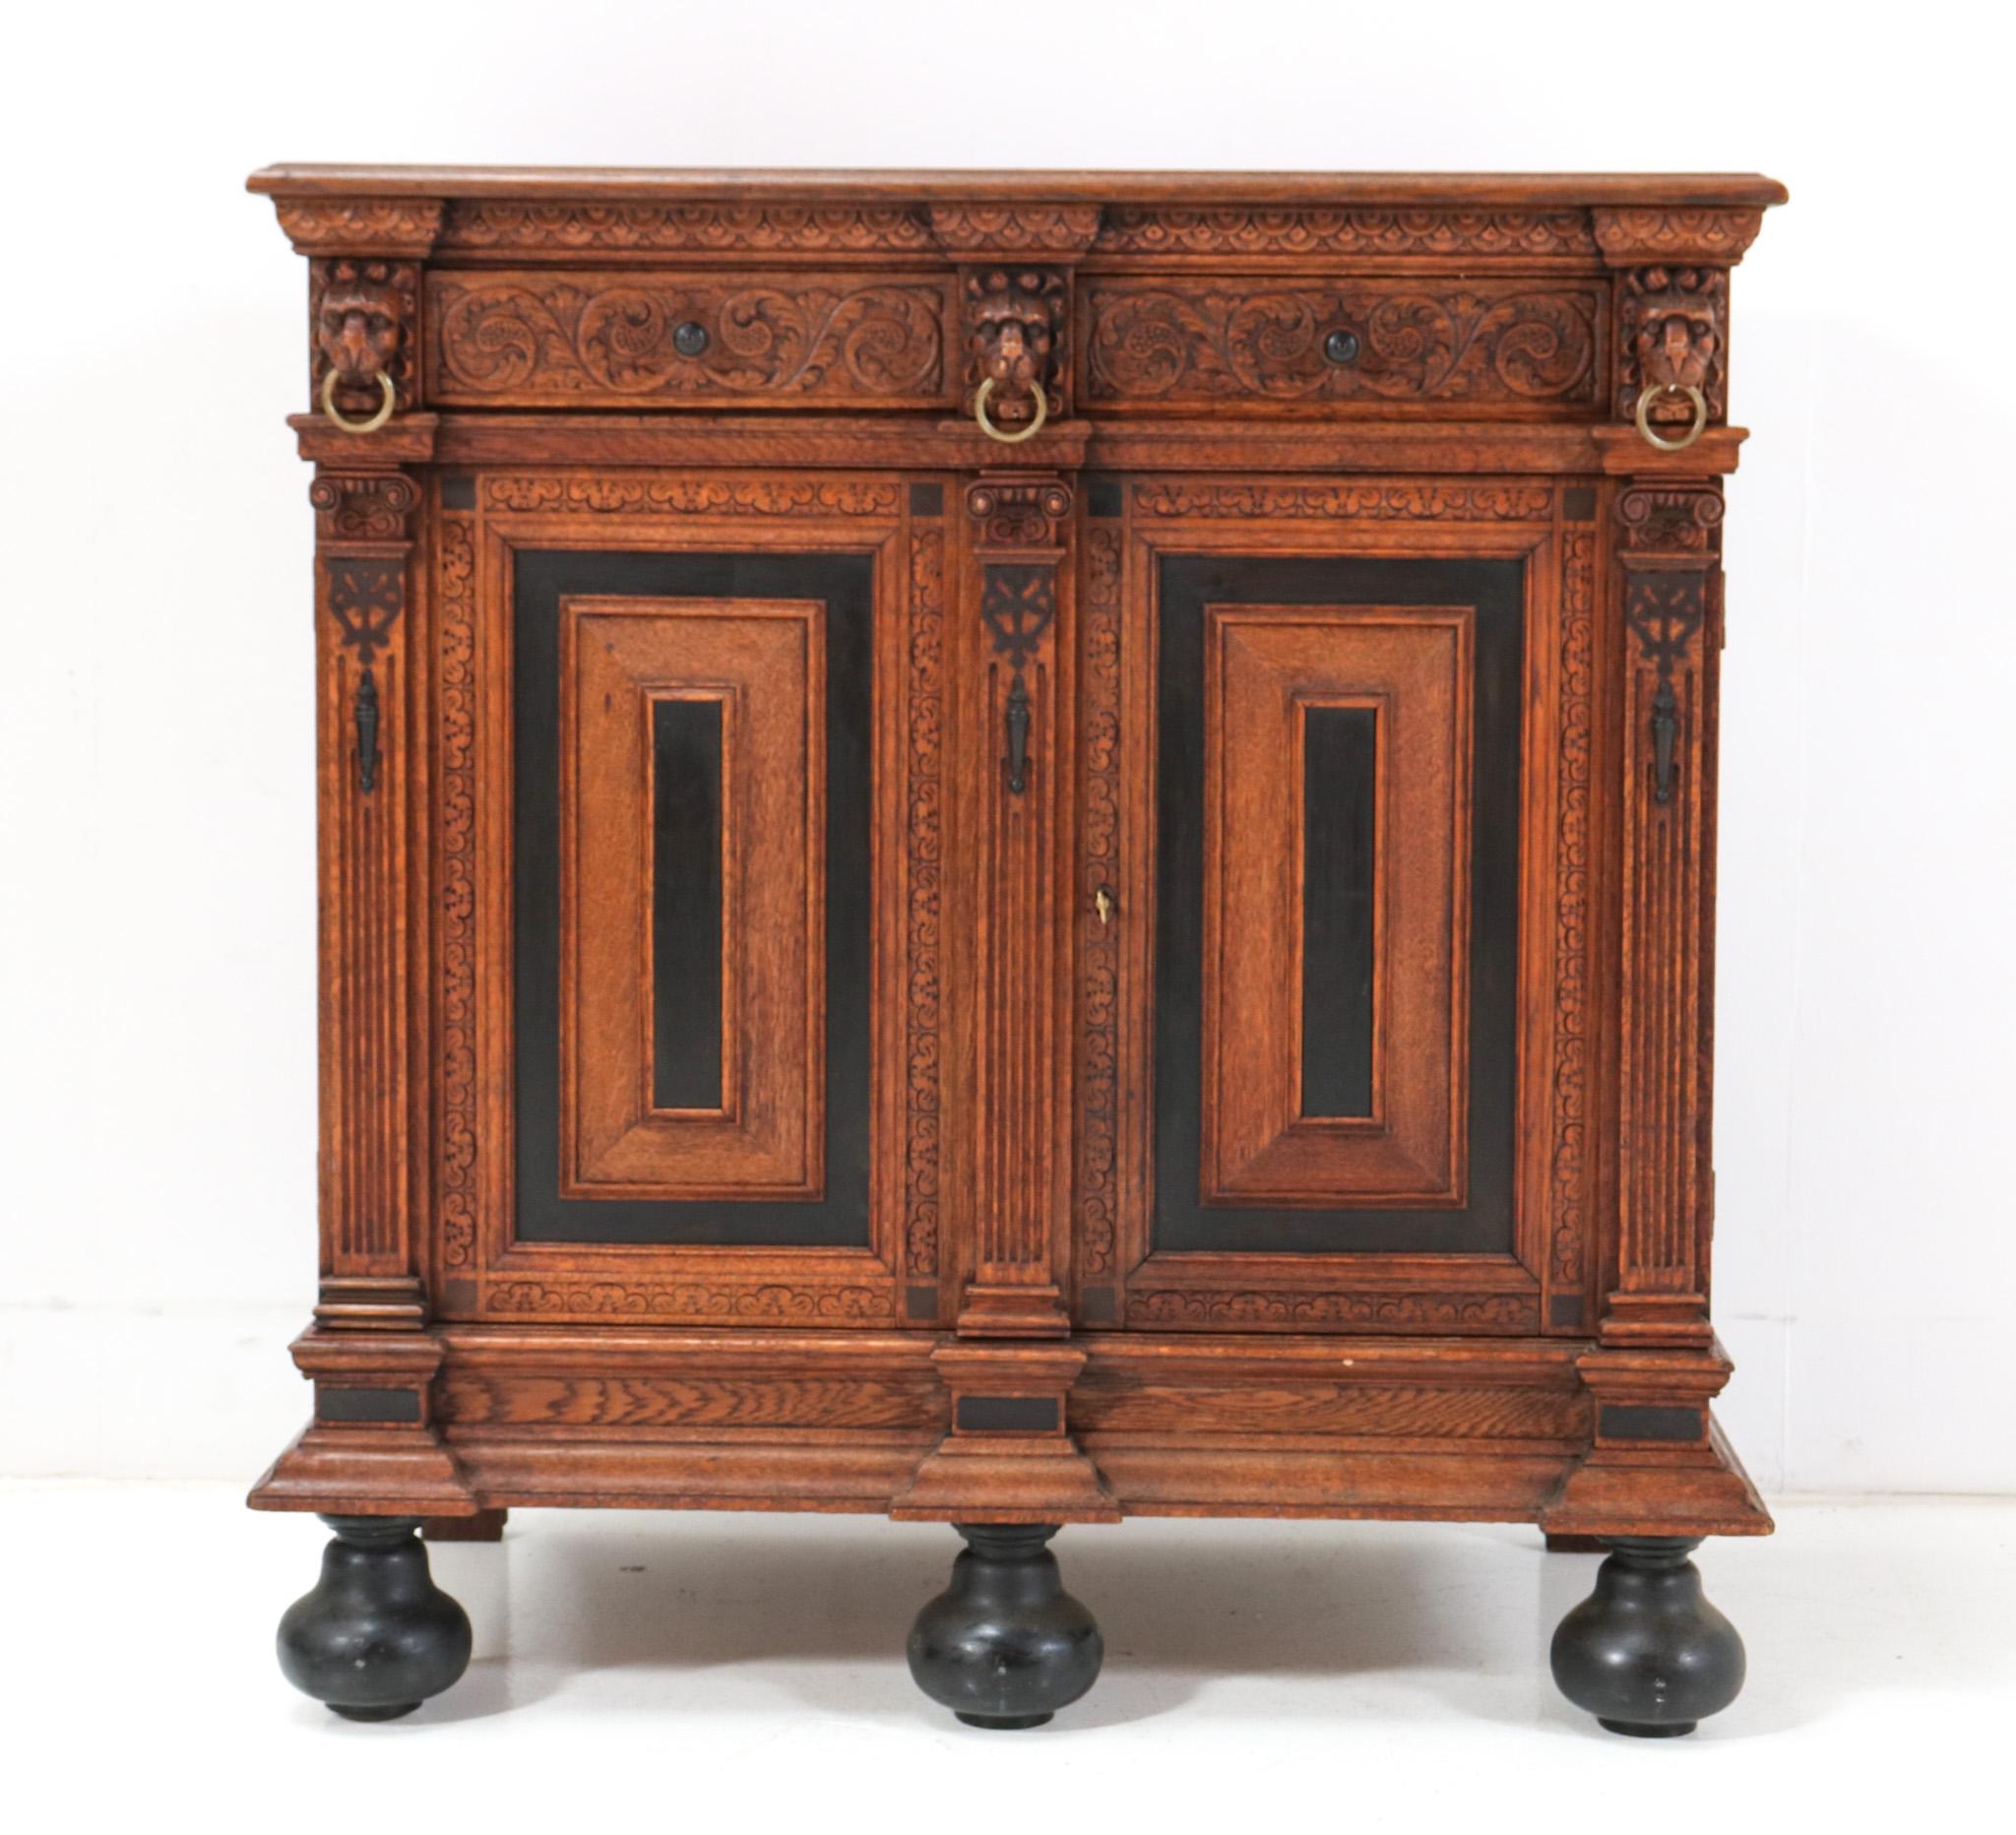 Stunning and rare Renaissance Revival cabinet.
Striking Dutch design from the 18th Century and manufactured in the 1900s.
Solid oak base with three original hand-carved lion heads and hand-carved decorations on the two drawers.
The backside is